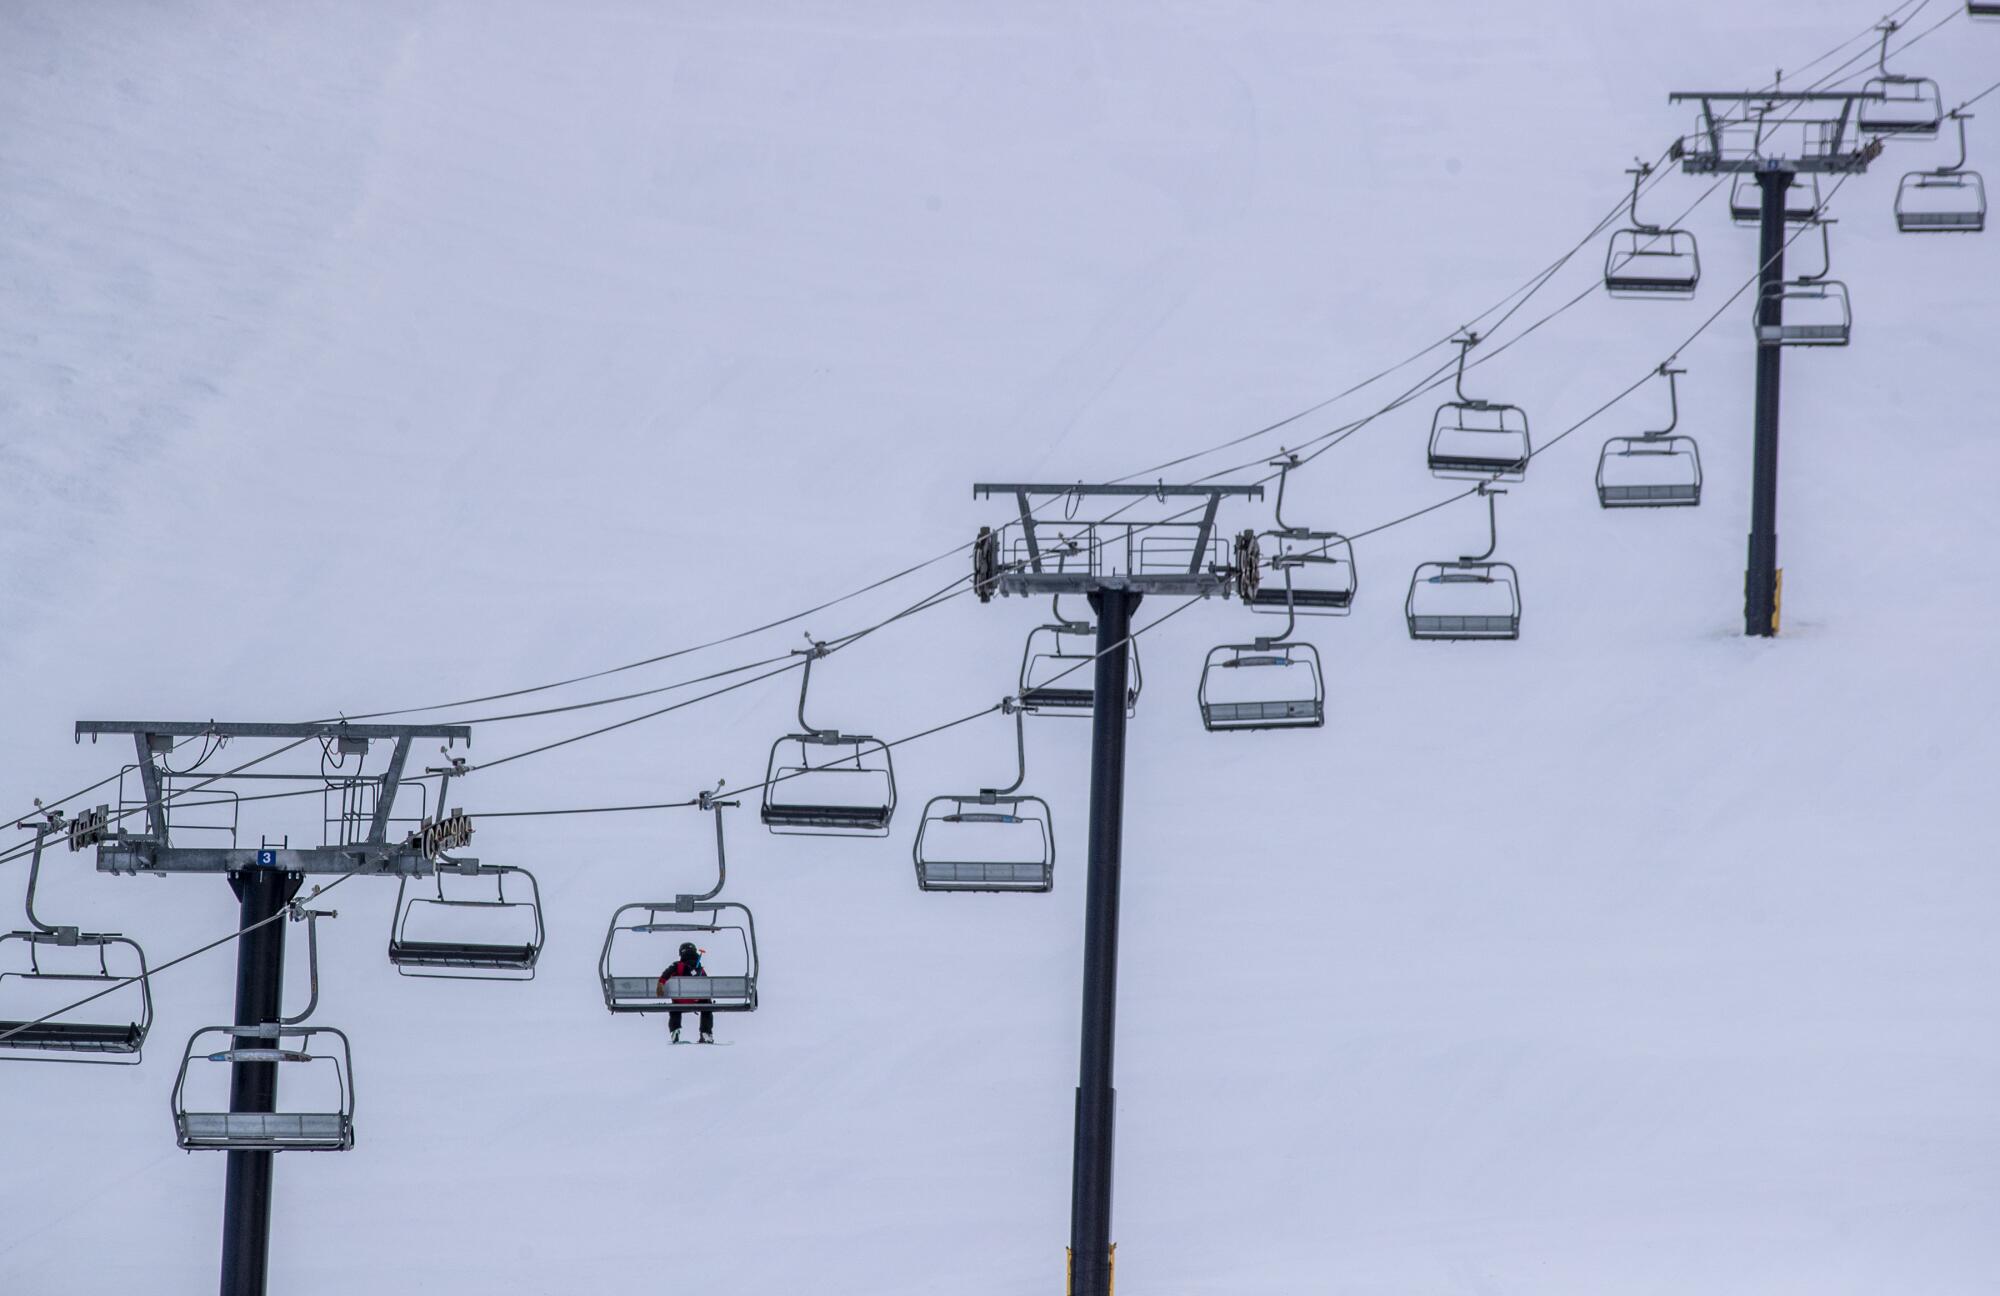 A ski lift is almost empty